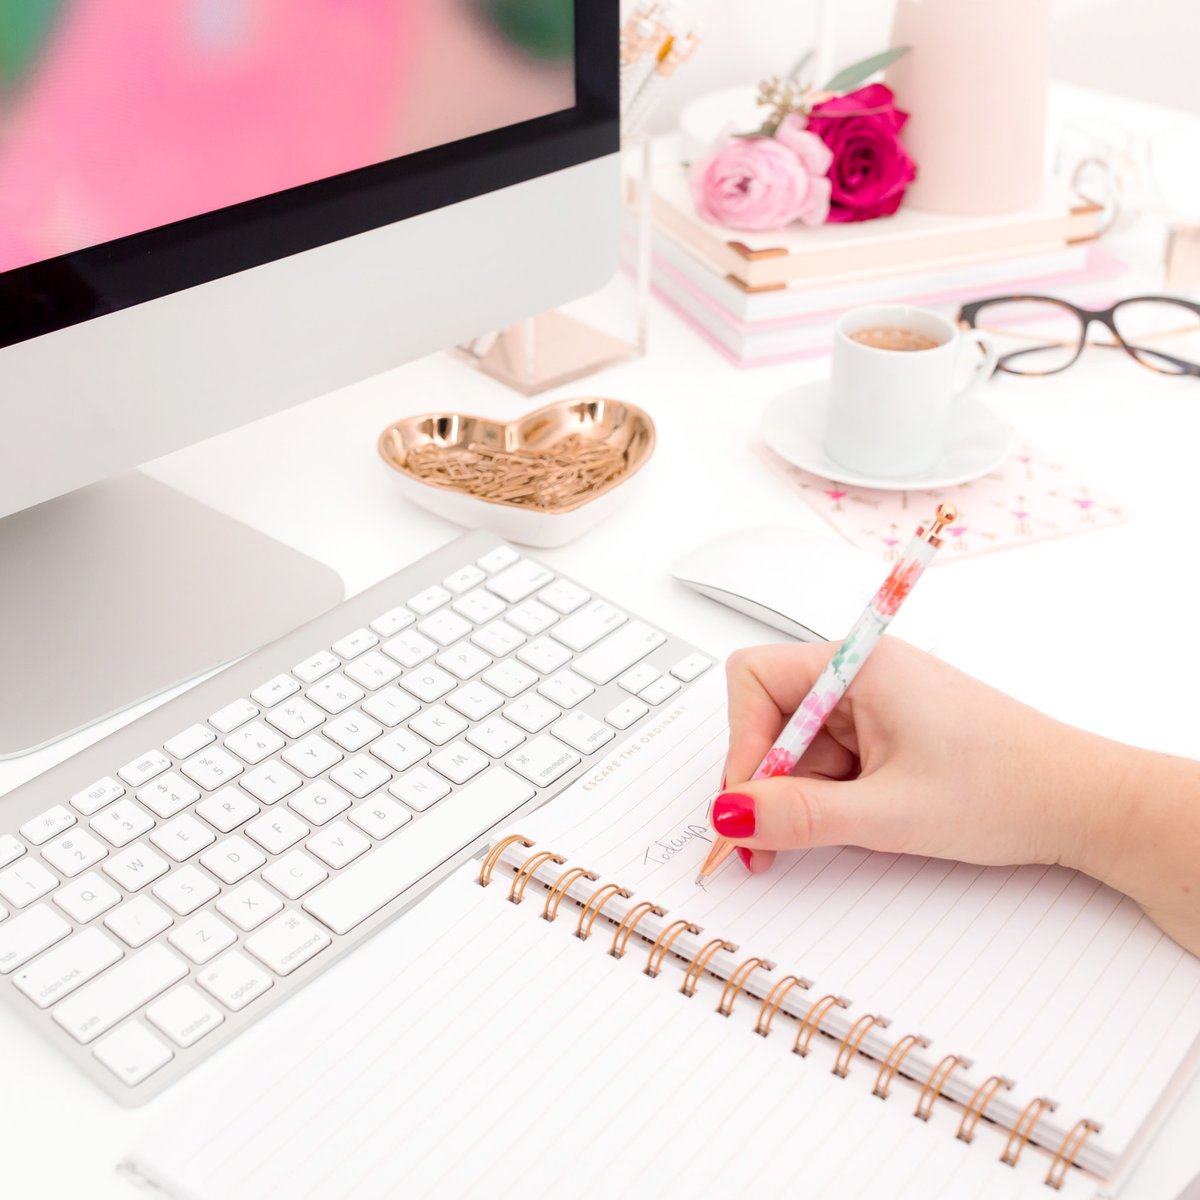 Editing is a hugely important part of writing anything you intend for other people to read – whether that’s a book, a magazine, a newspaper… or indeed a blog post!

How to edit a blog post (by an ex English teacher turned blogger) >>> bit.ly/32PewQF

#blogpostediting